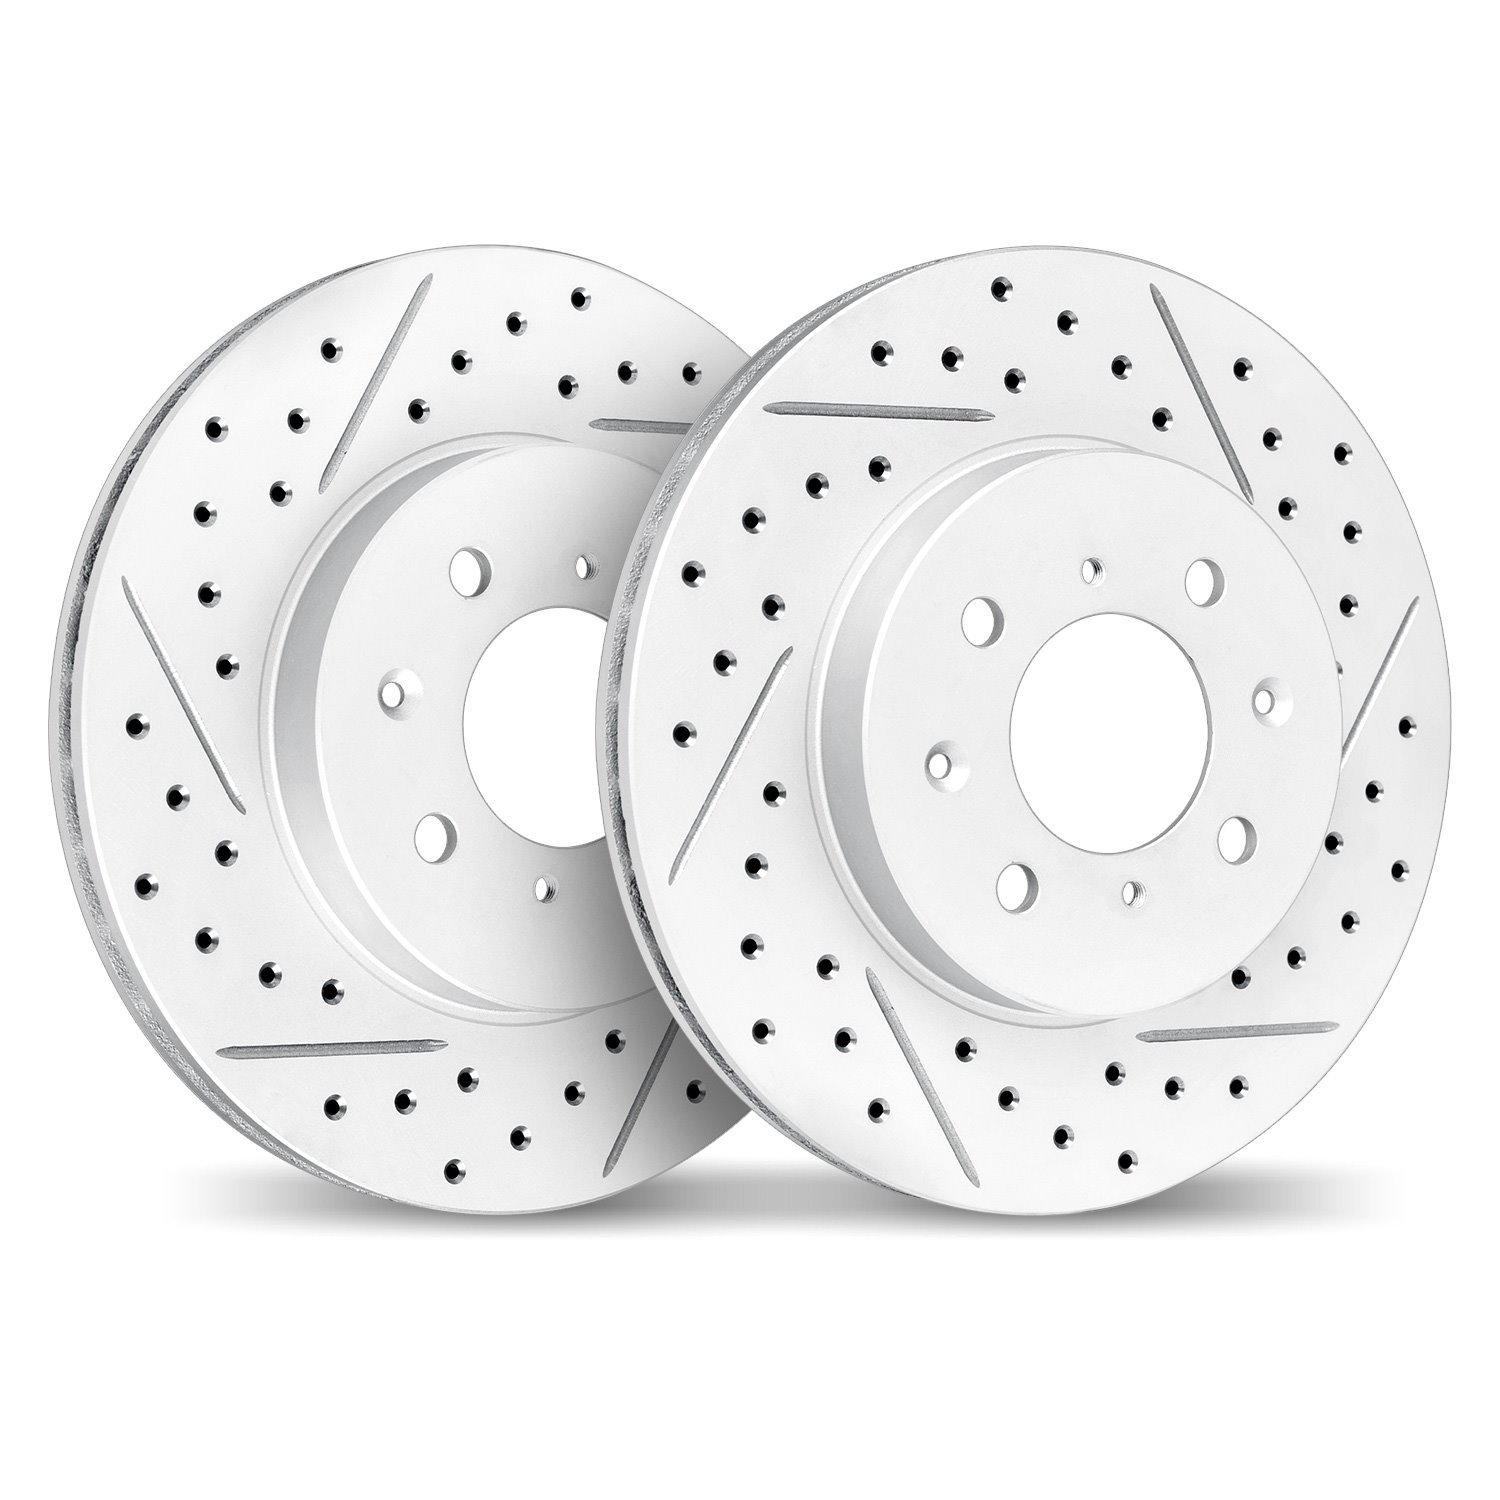 2002-54021 Geoperformance Drilled/Slotted Brake Rotors, 2000-2015 Ford/Lincoln/Mercury/Mazda, Position: Front